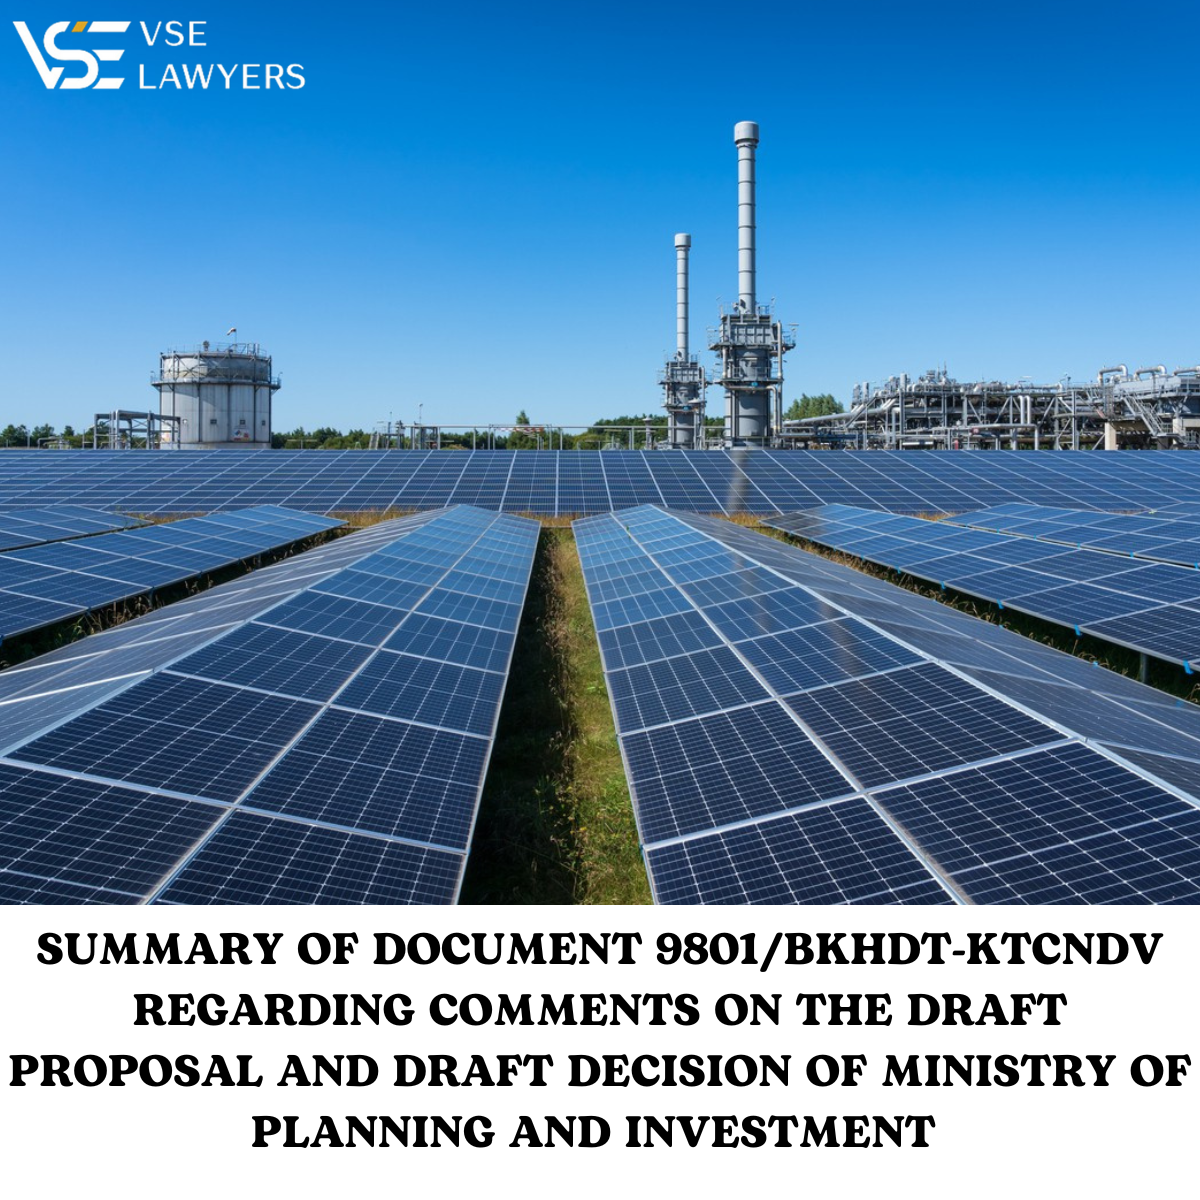 SUMMARY OF DOCUMENT 9801/BKHDT-KTCNDV REGARDING COMMENTS ON THE DRAFT PROPOSAL AND DRAFT DECISION OF MINISTRY OF PLANNING AND INVESTMENT